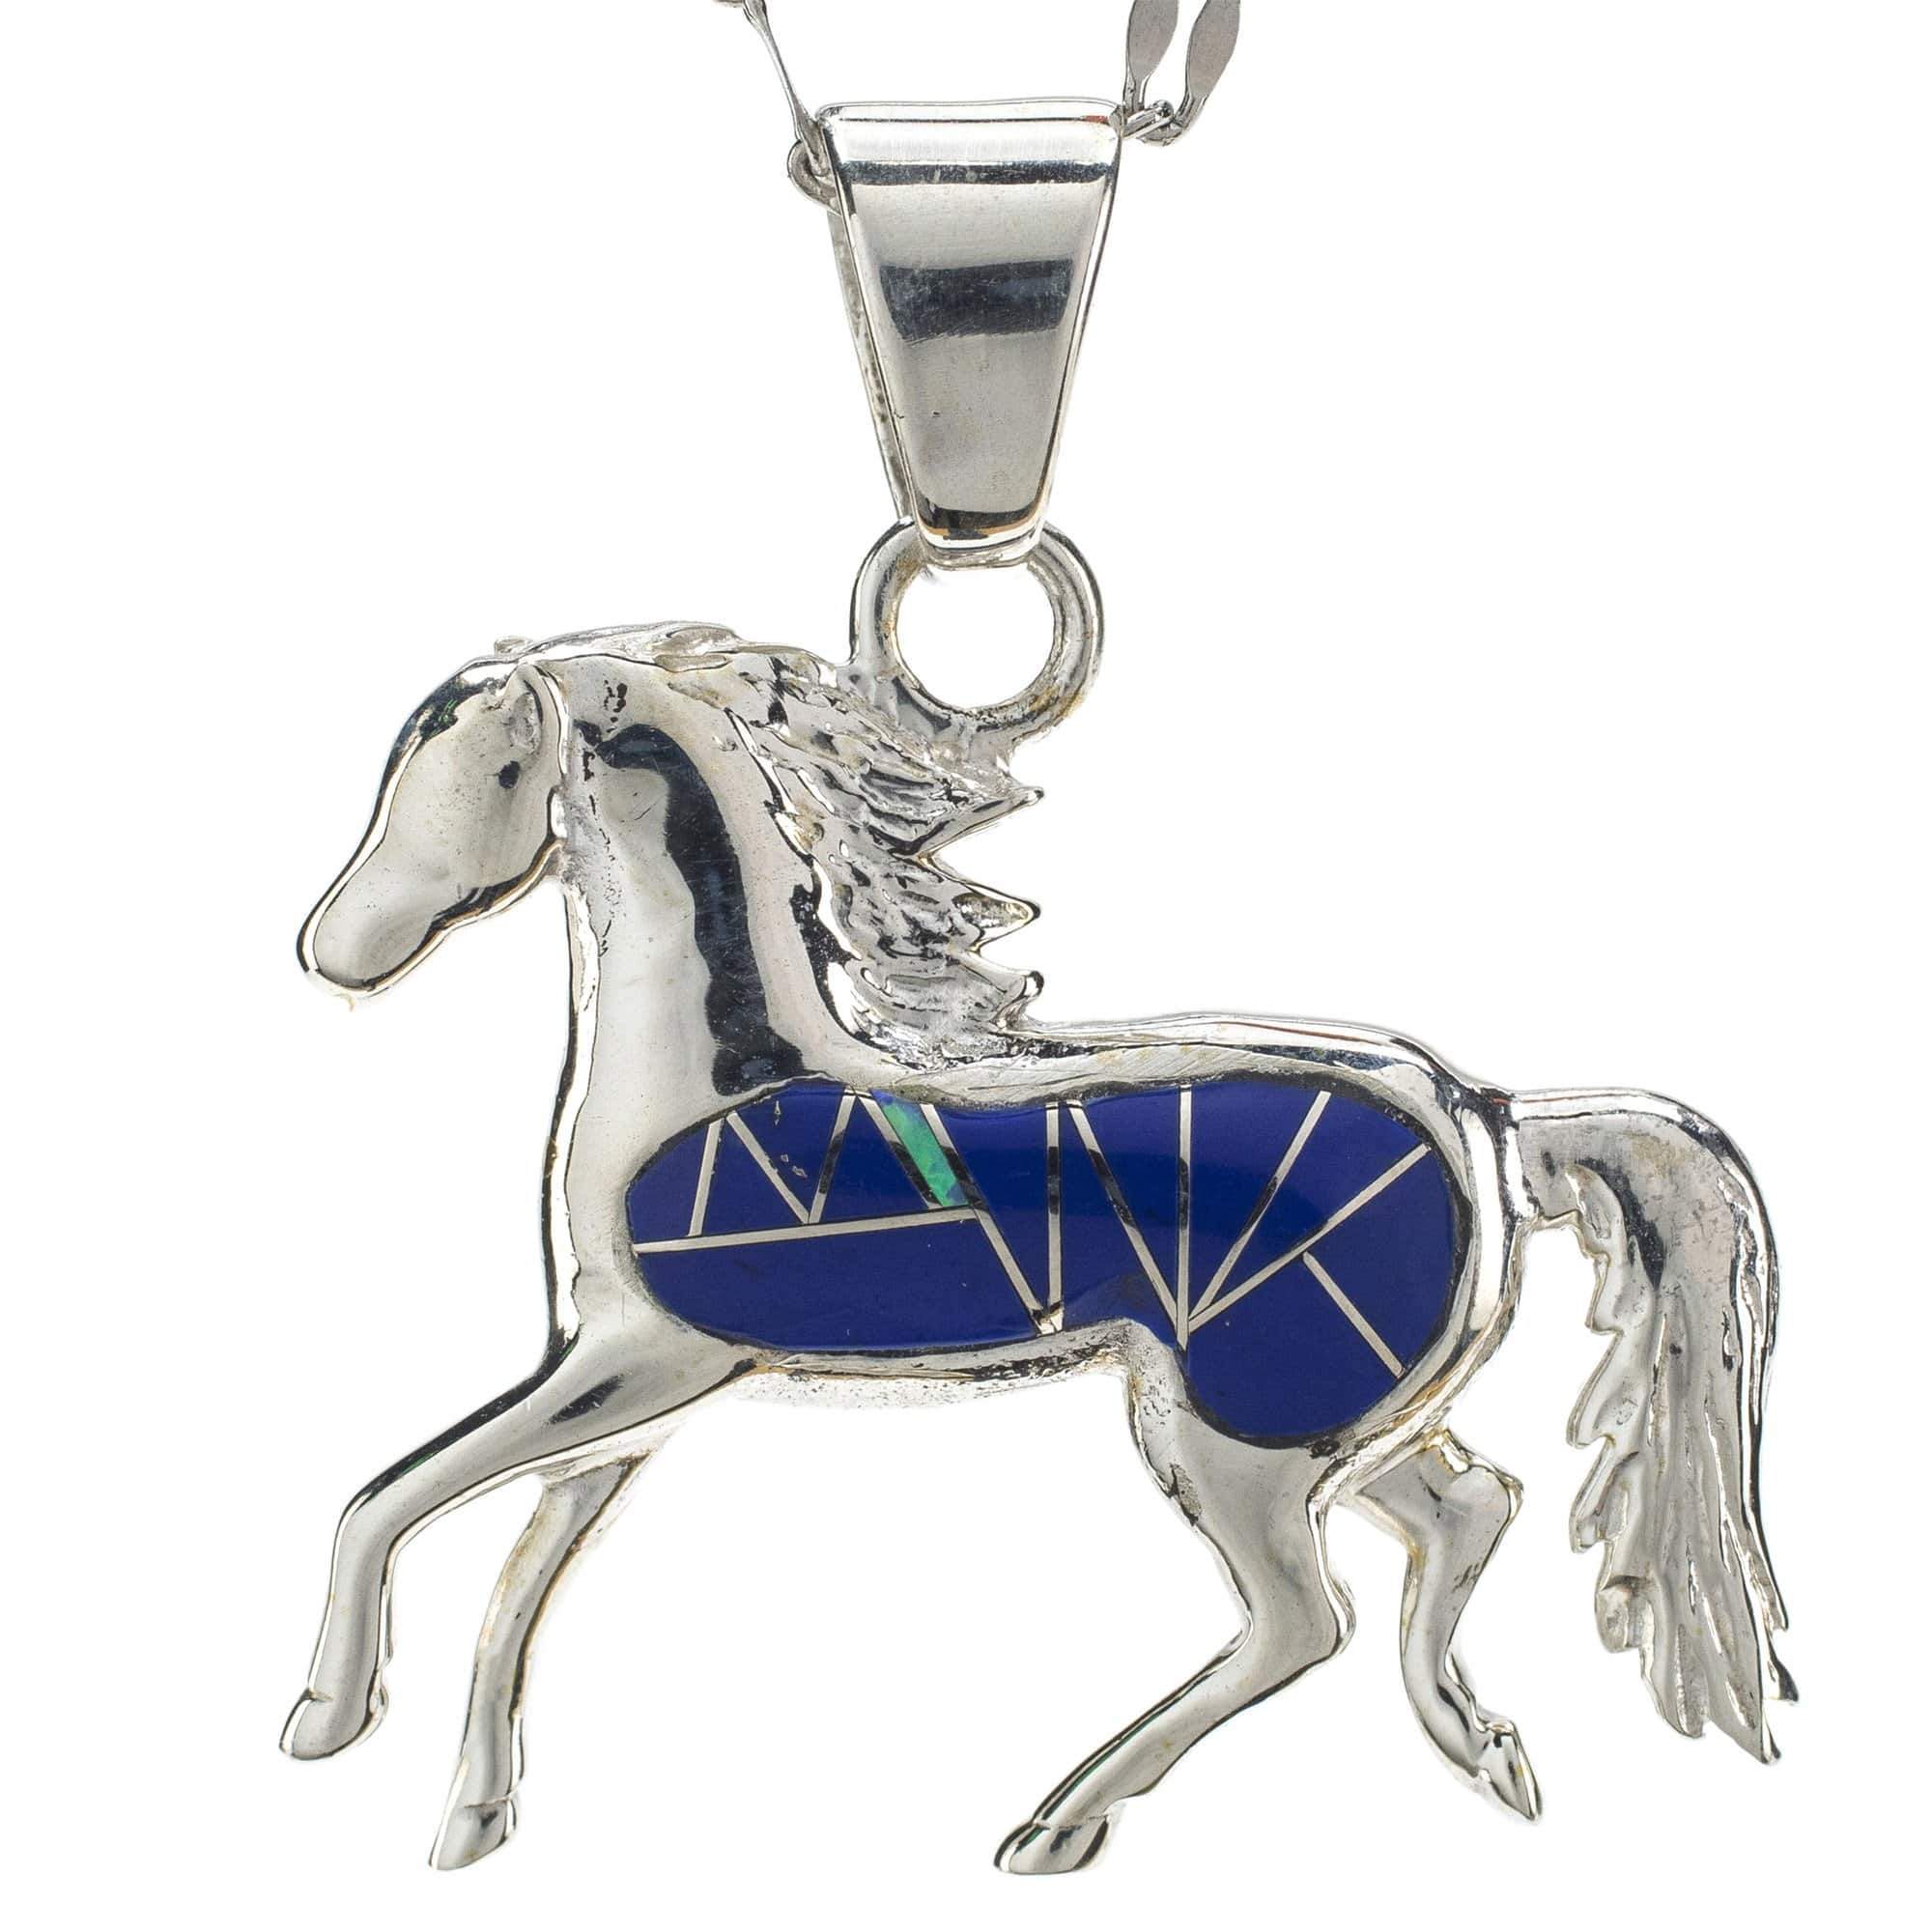 Kalifano Southwest Silver Jewelry Lapis Horse 925 Sterling Silver Pendant USA Handmade with Opal Accent NMN.0610.LP